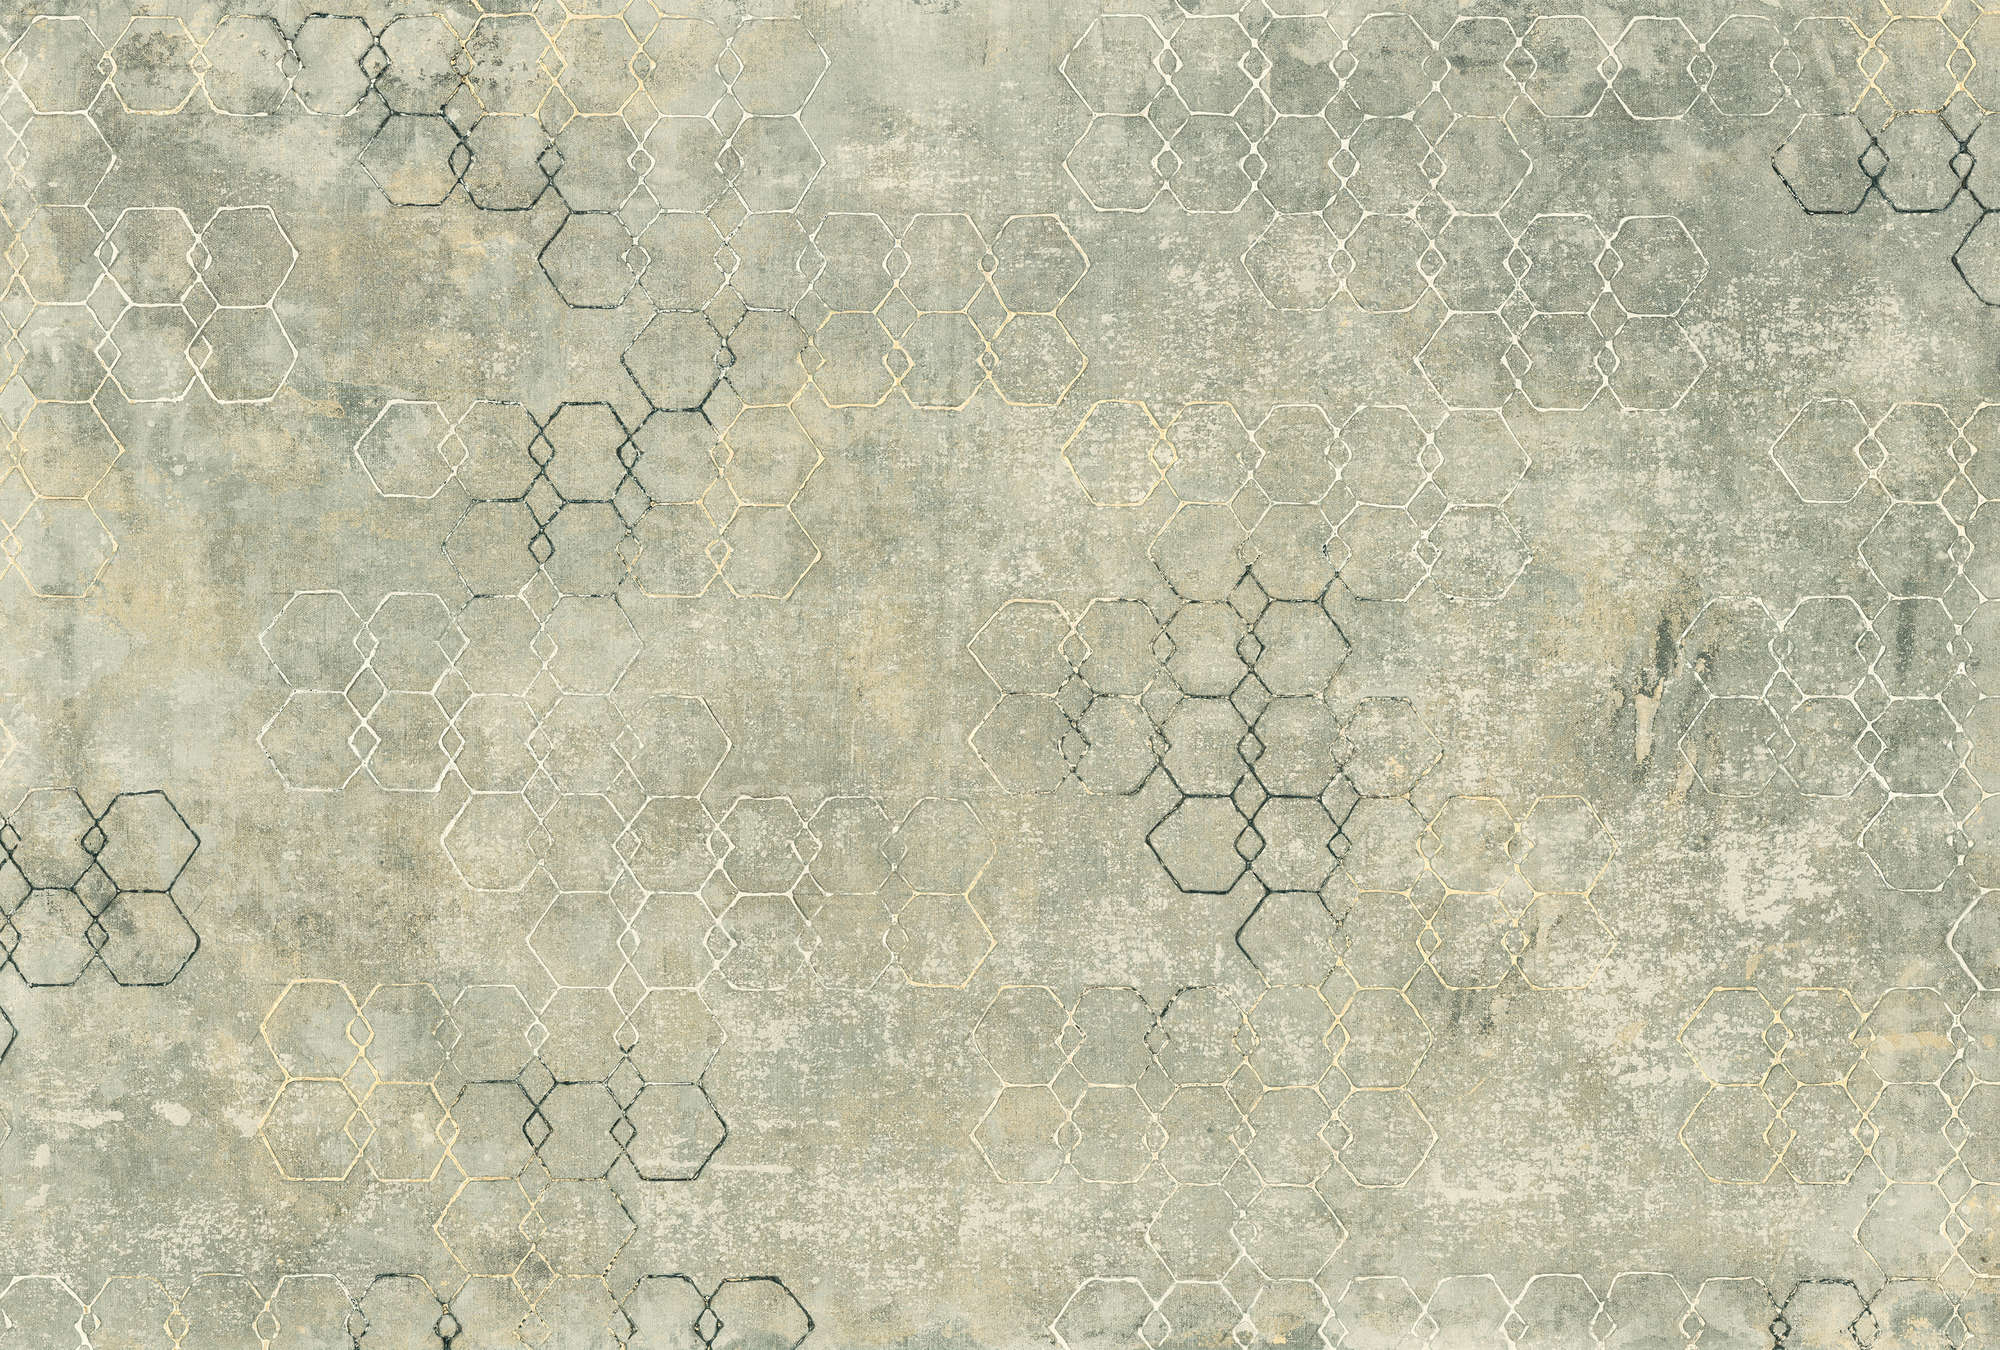             Photo wallpaper concrete with hexagon design & used look - green, white, beige
        